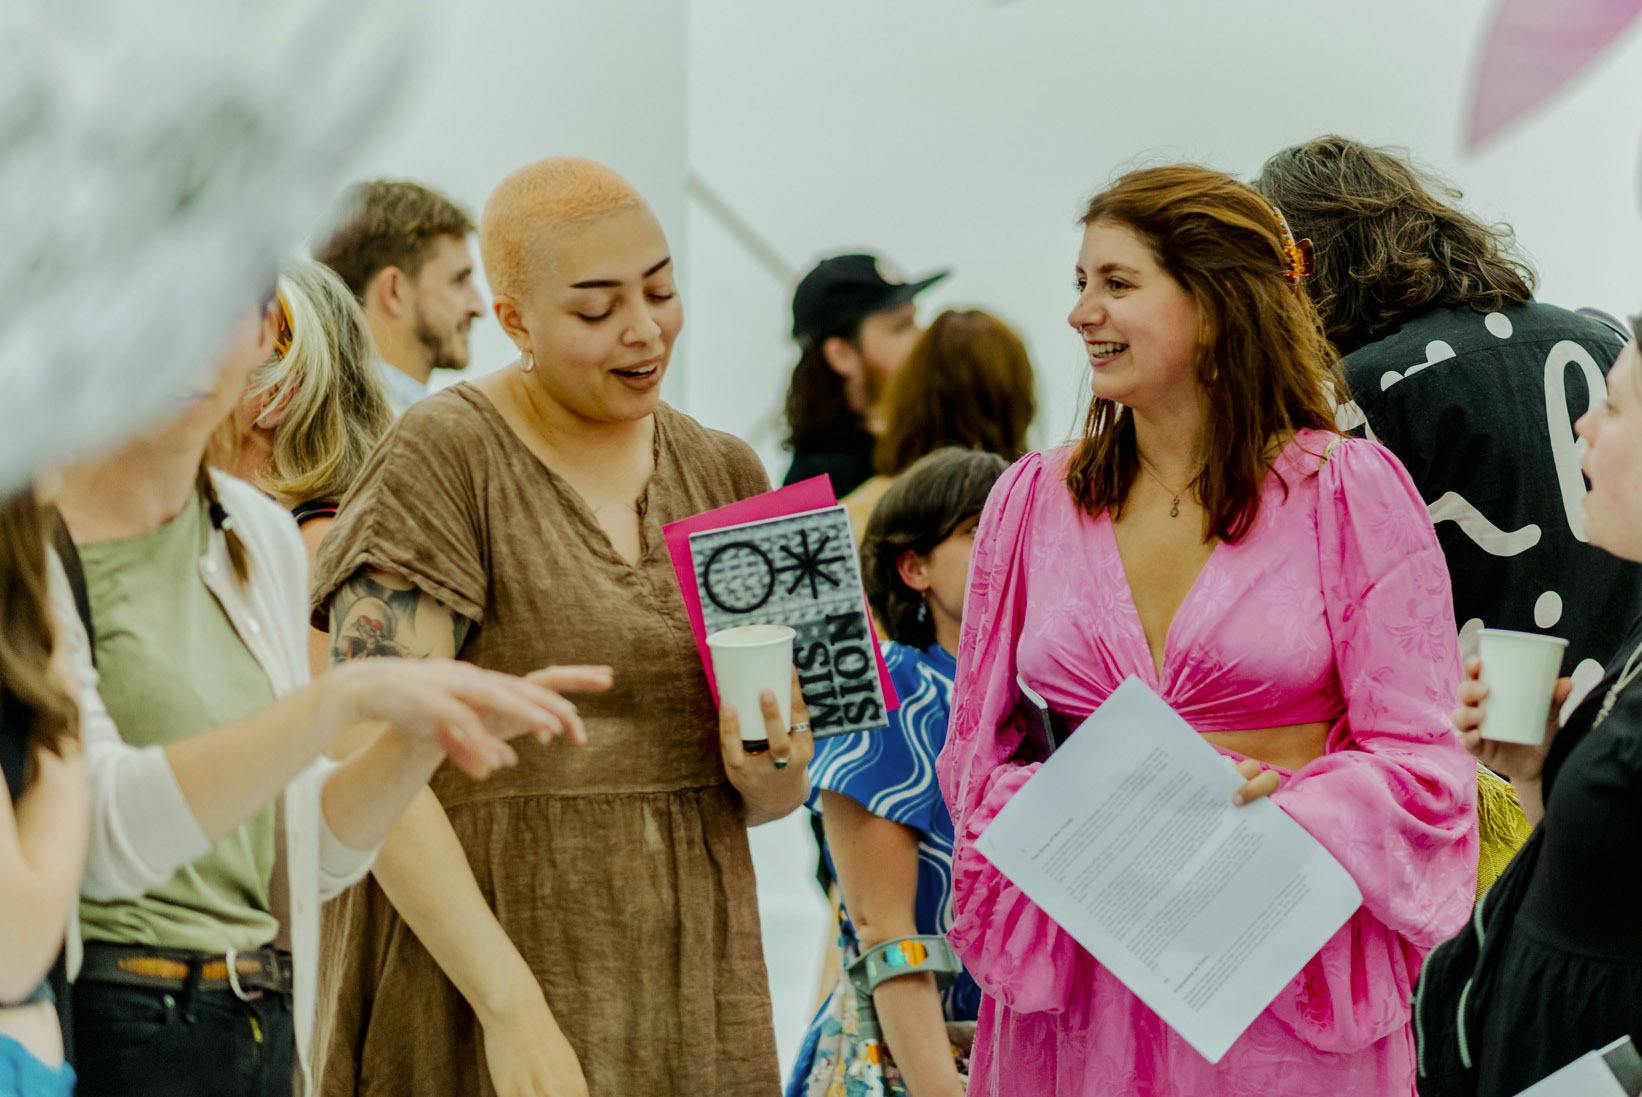 A person with short peach coloured hair stands next to a person in a pink dress amongst a crowd of people enjoying the Arts University Plymouth BA Hons Fine Art Show in June 2022